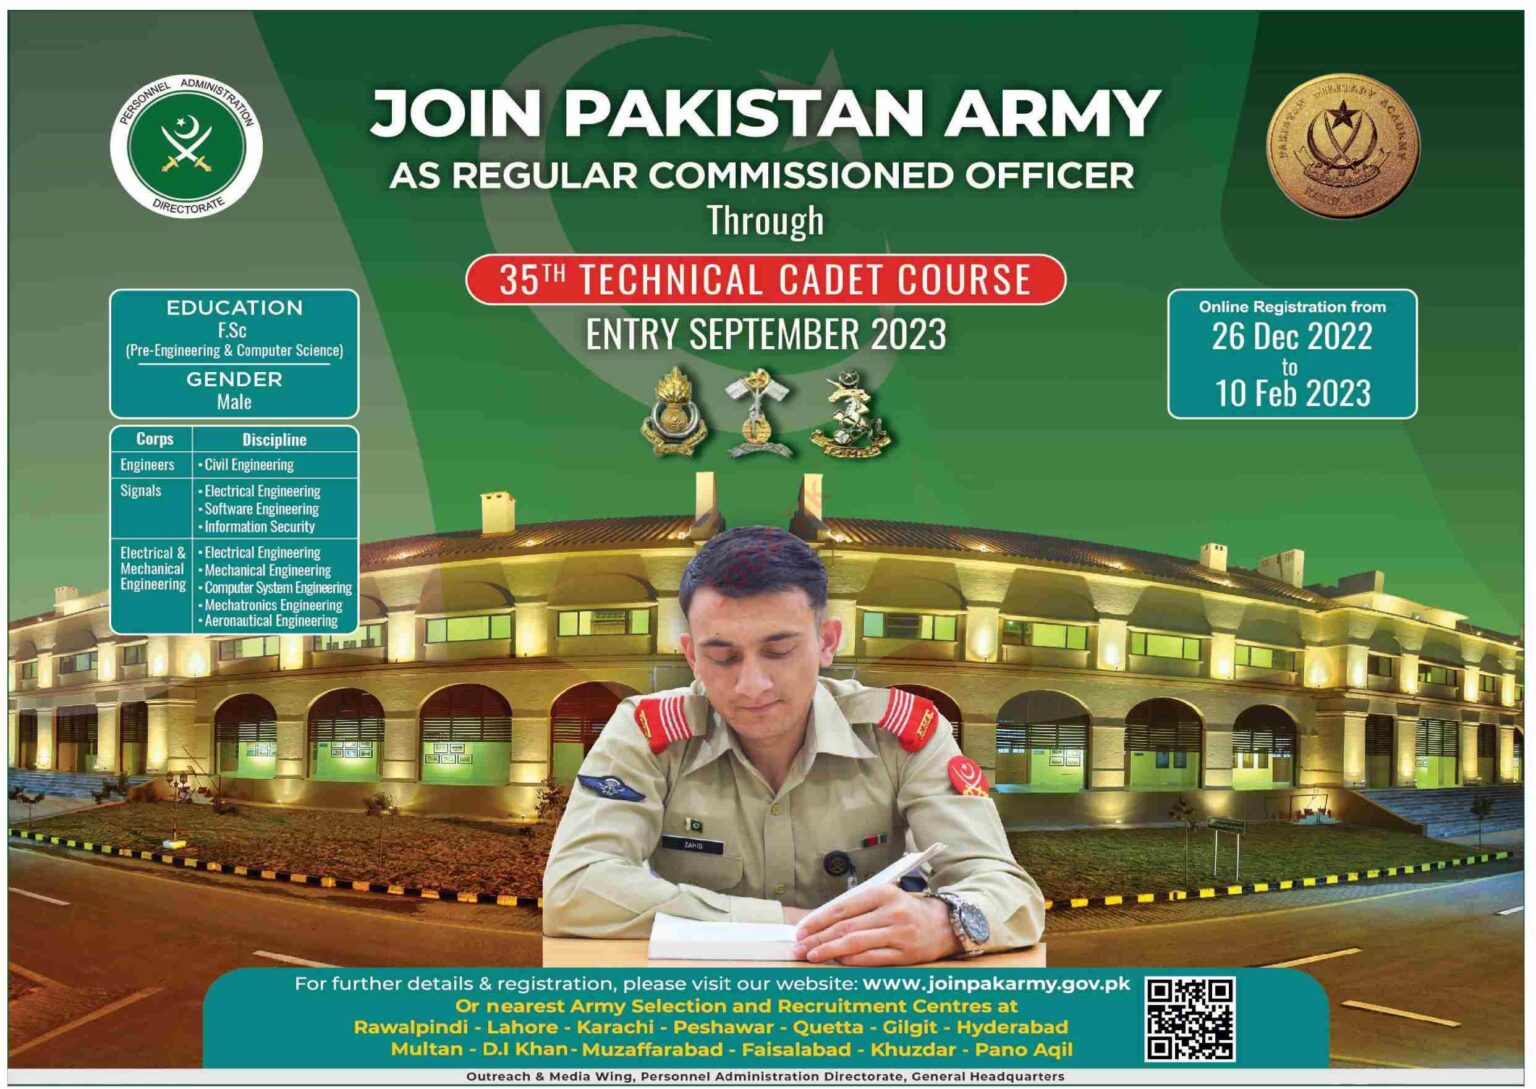 JOIN PAKISTAN ARMY AS OFFICER 2023